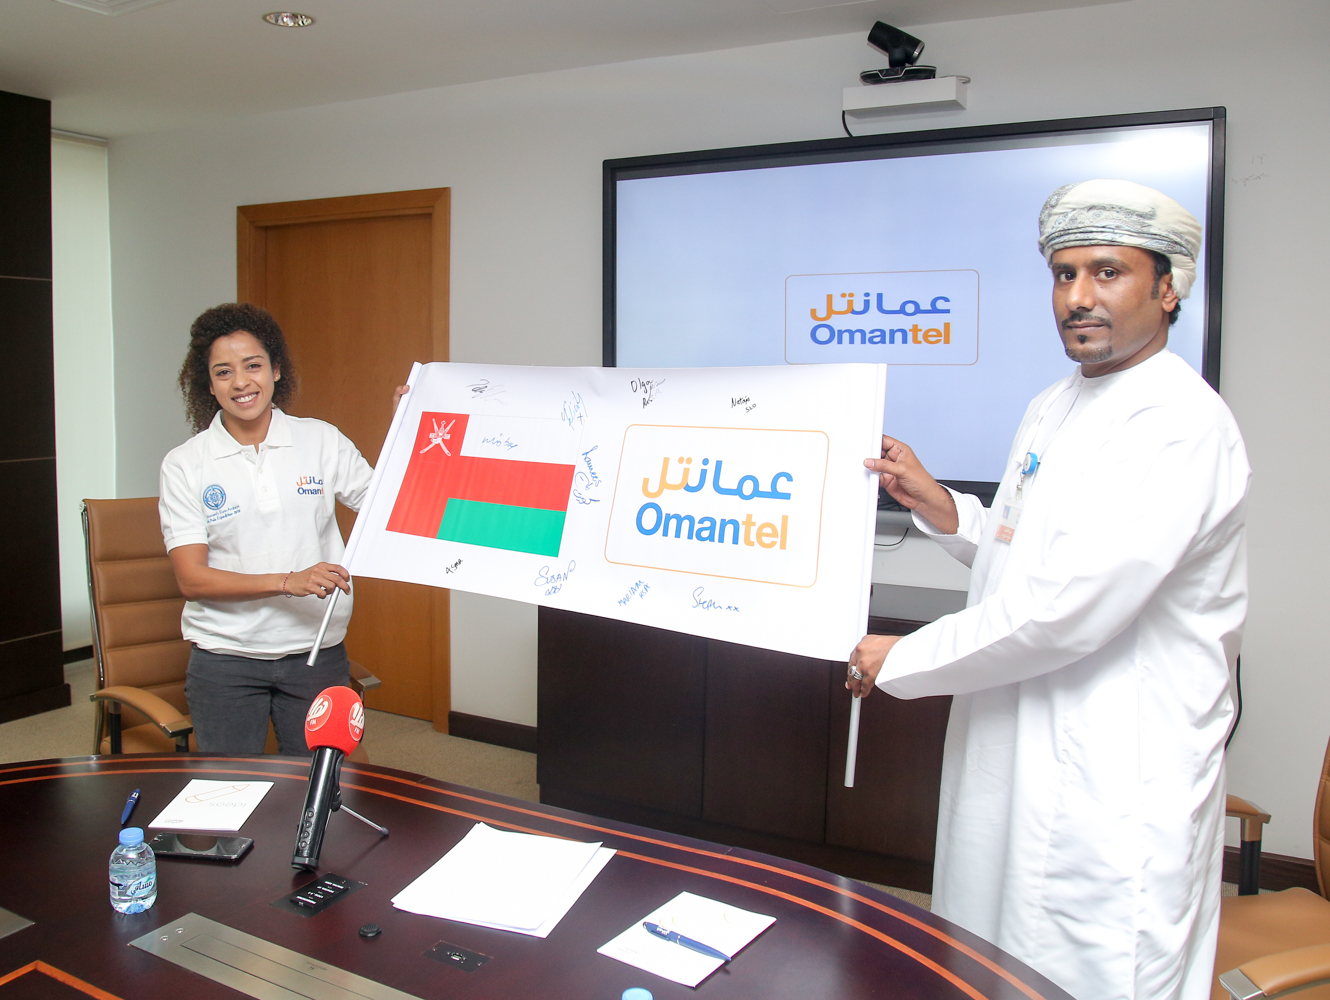 Concentrating on our goal kept us going, says first Omani woman to ski North Pole